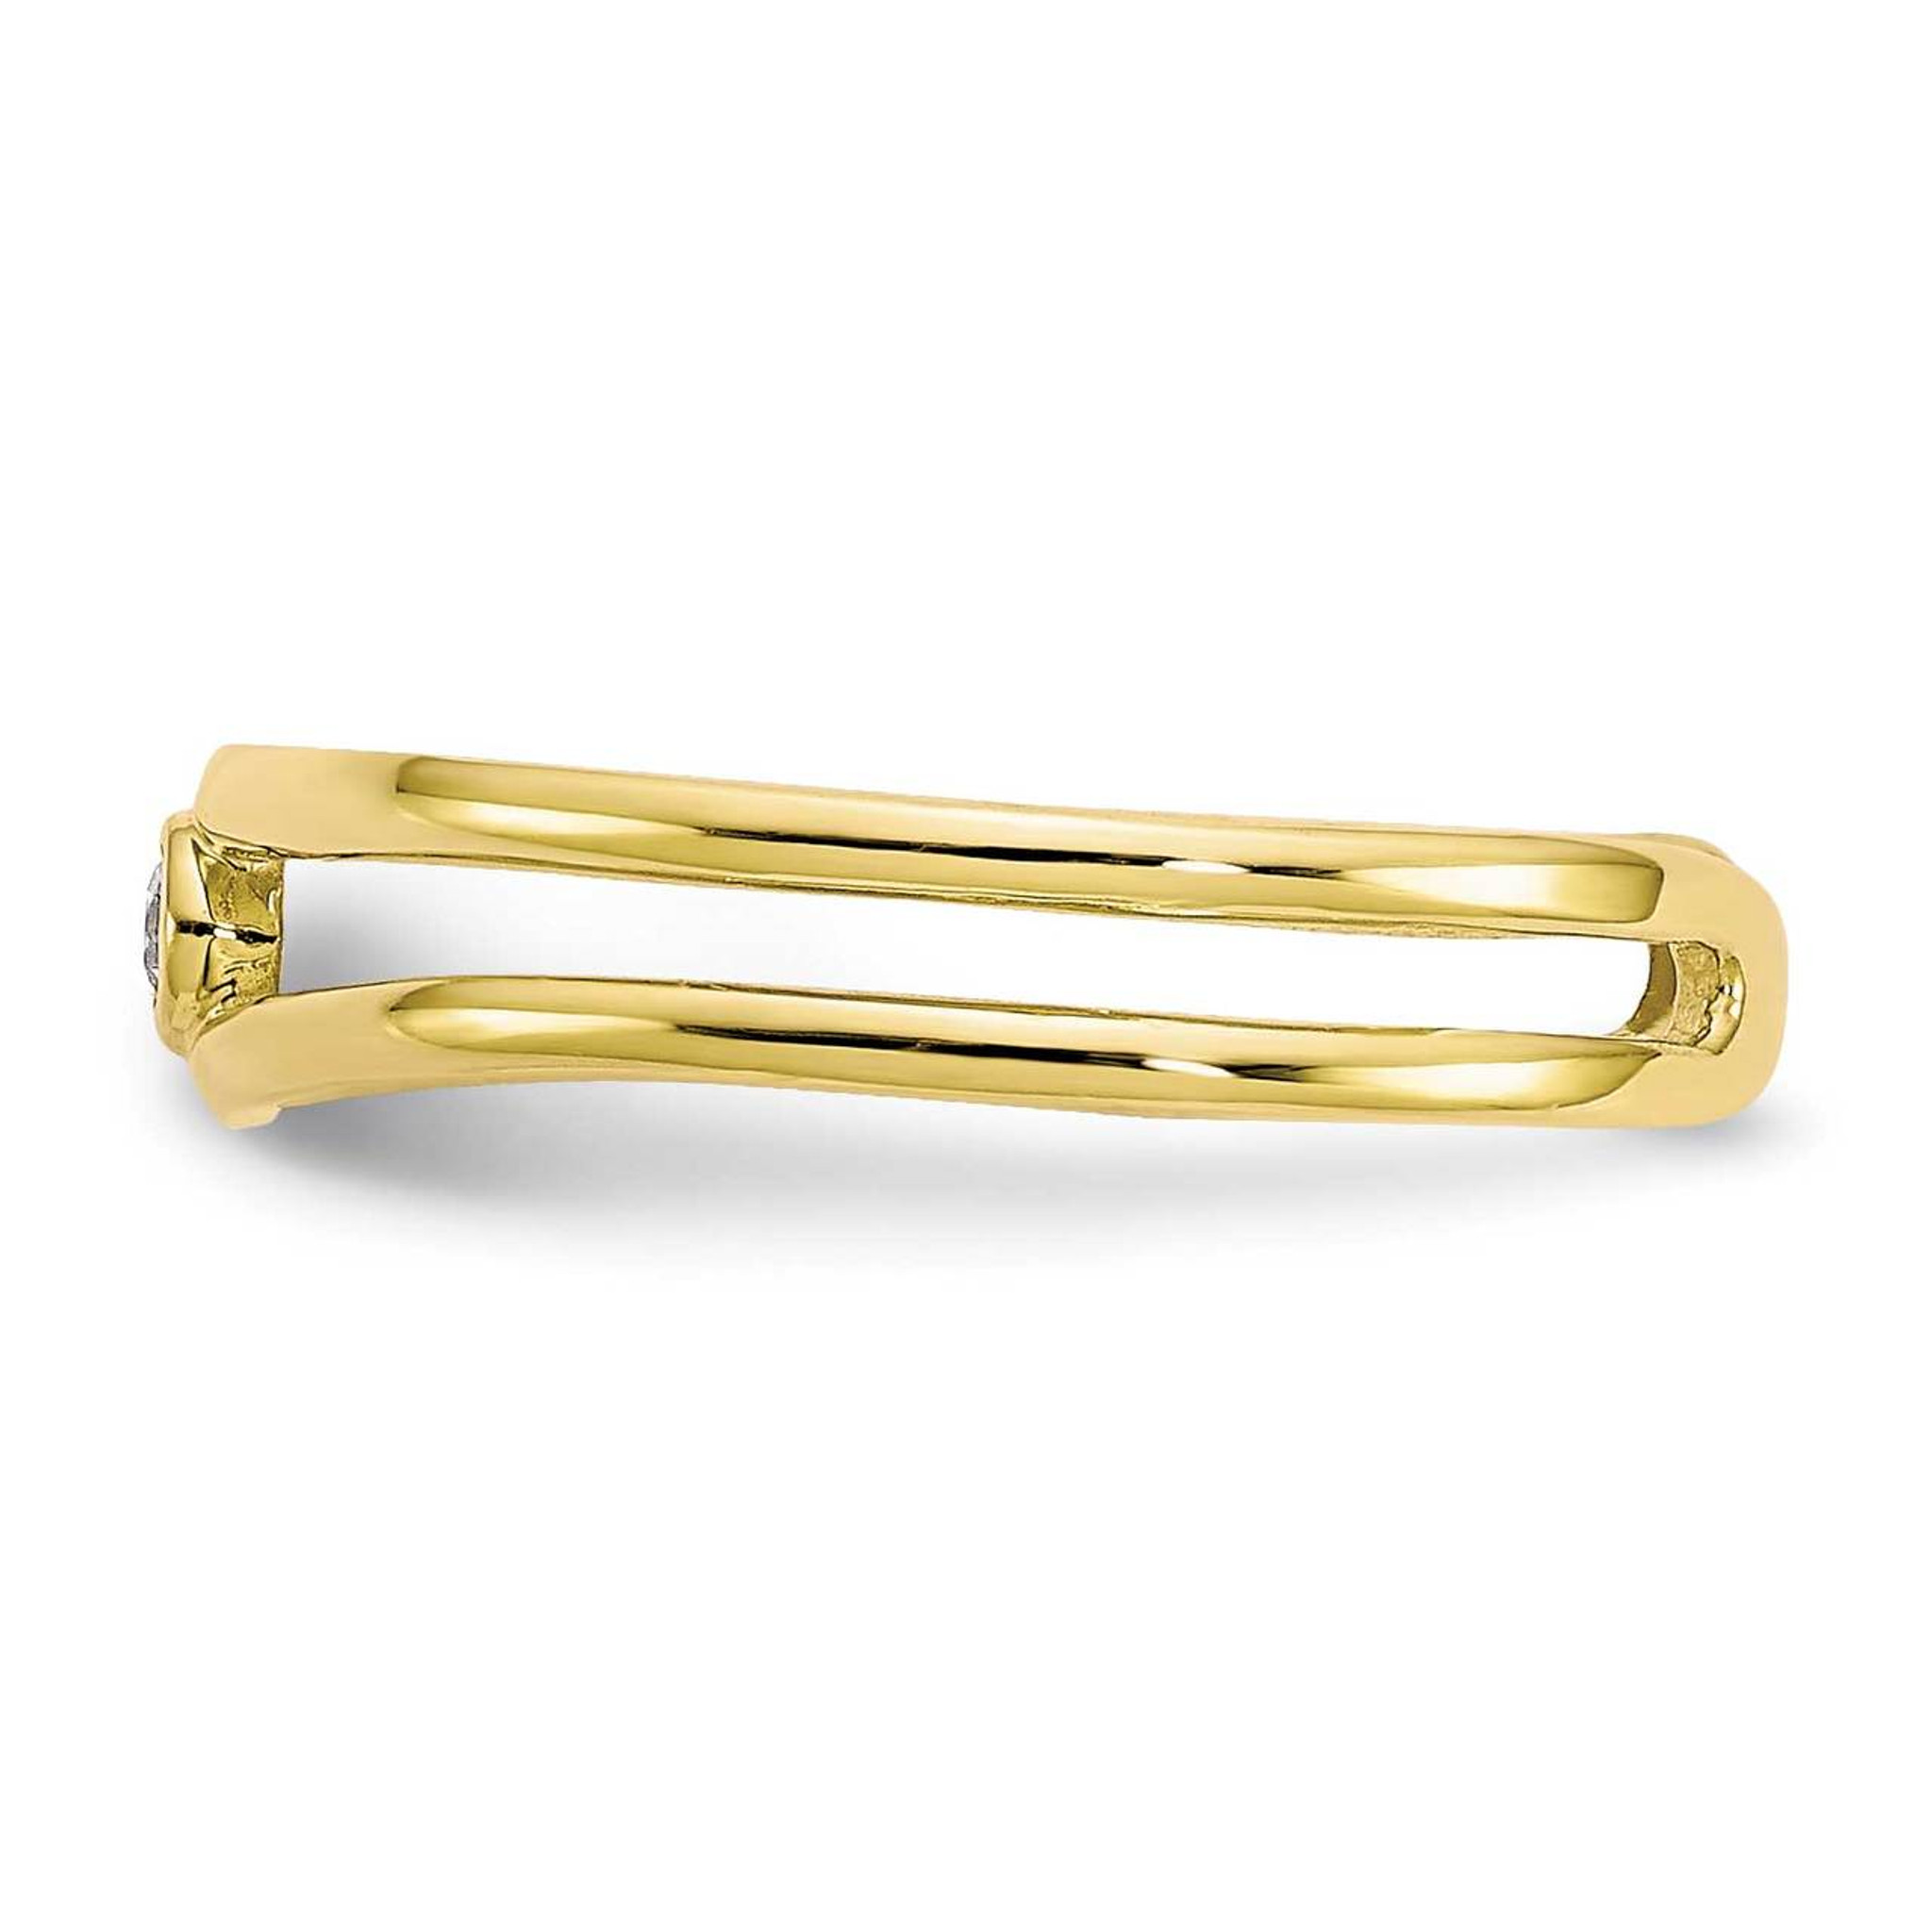 Real 10k Yellow Gold Bar with Cubic Zirconia Stones Toe Ring